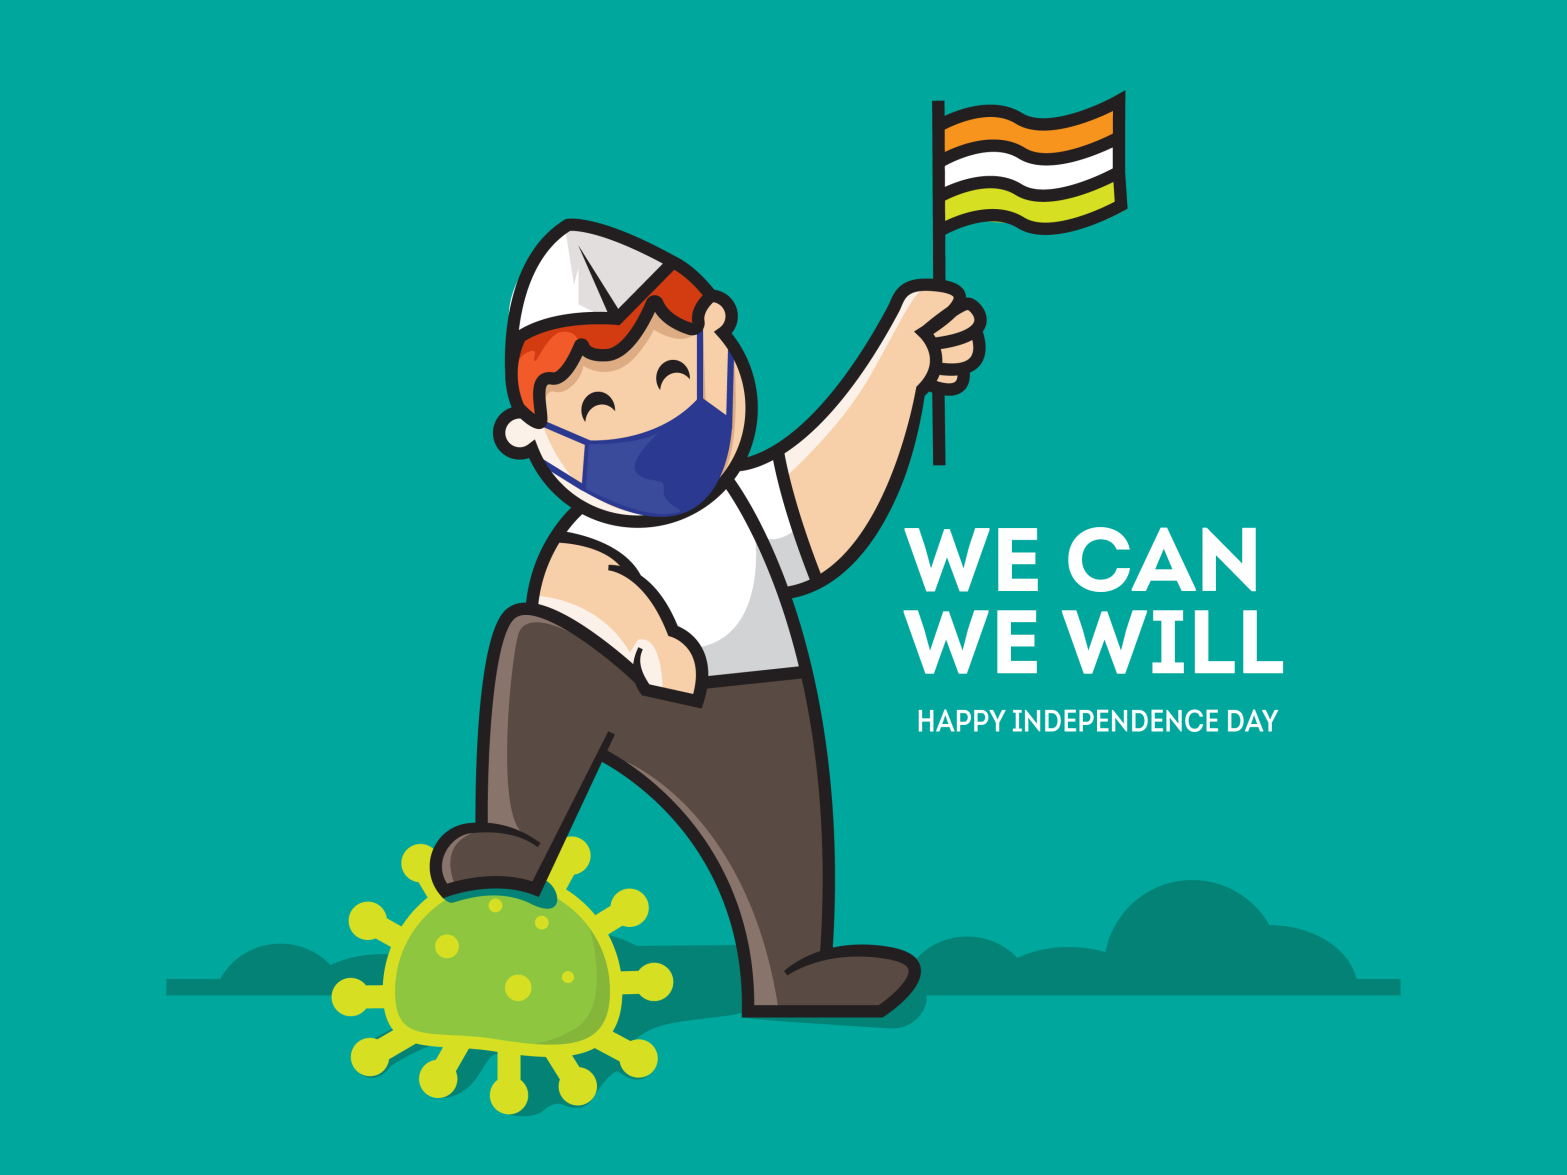 Happy Independence Day by swapnil madavi on Dribbble